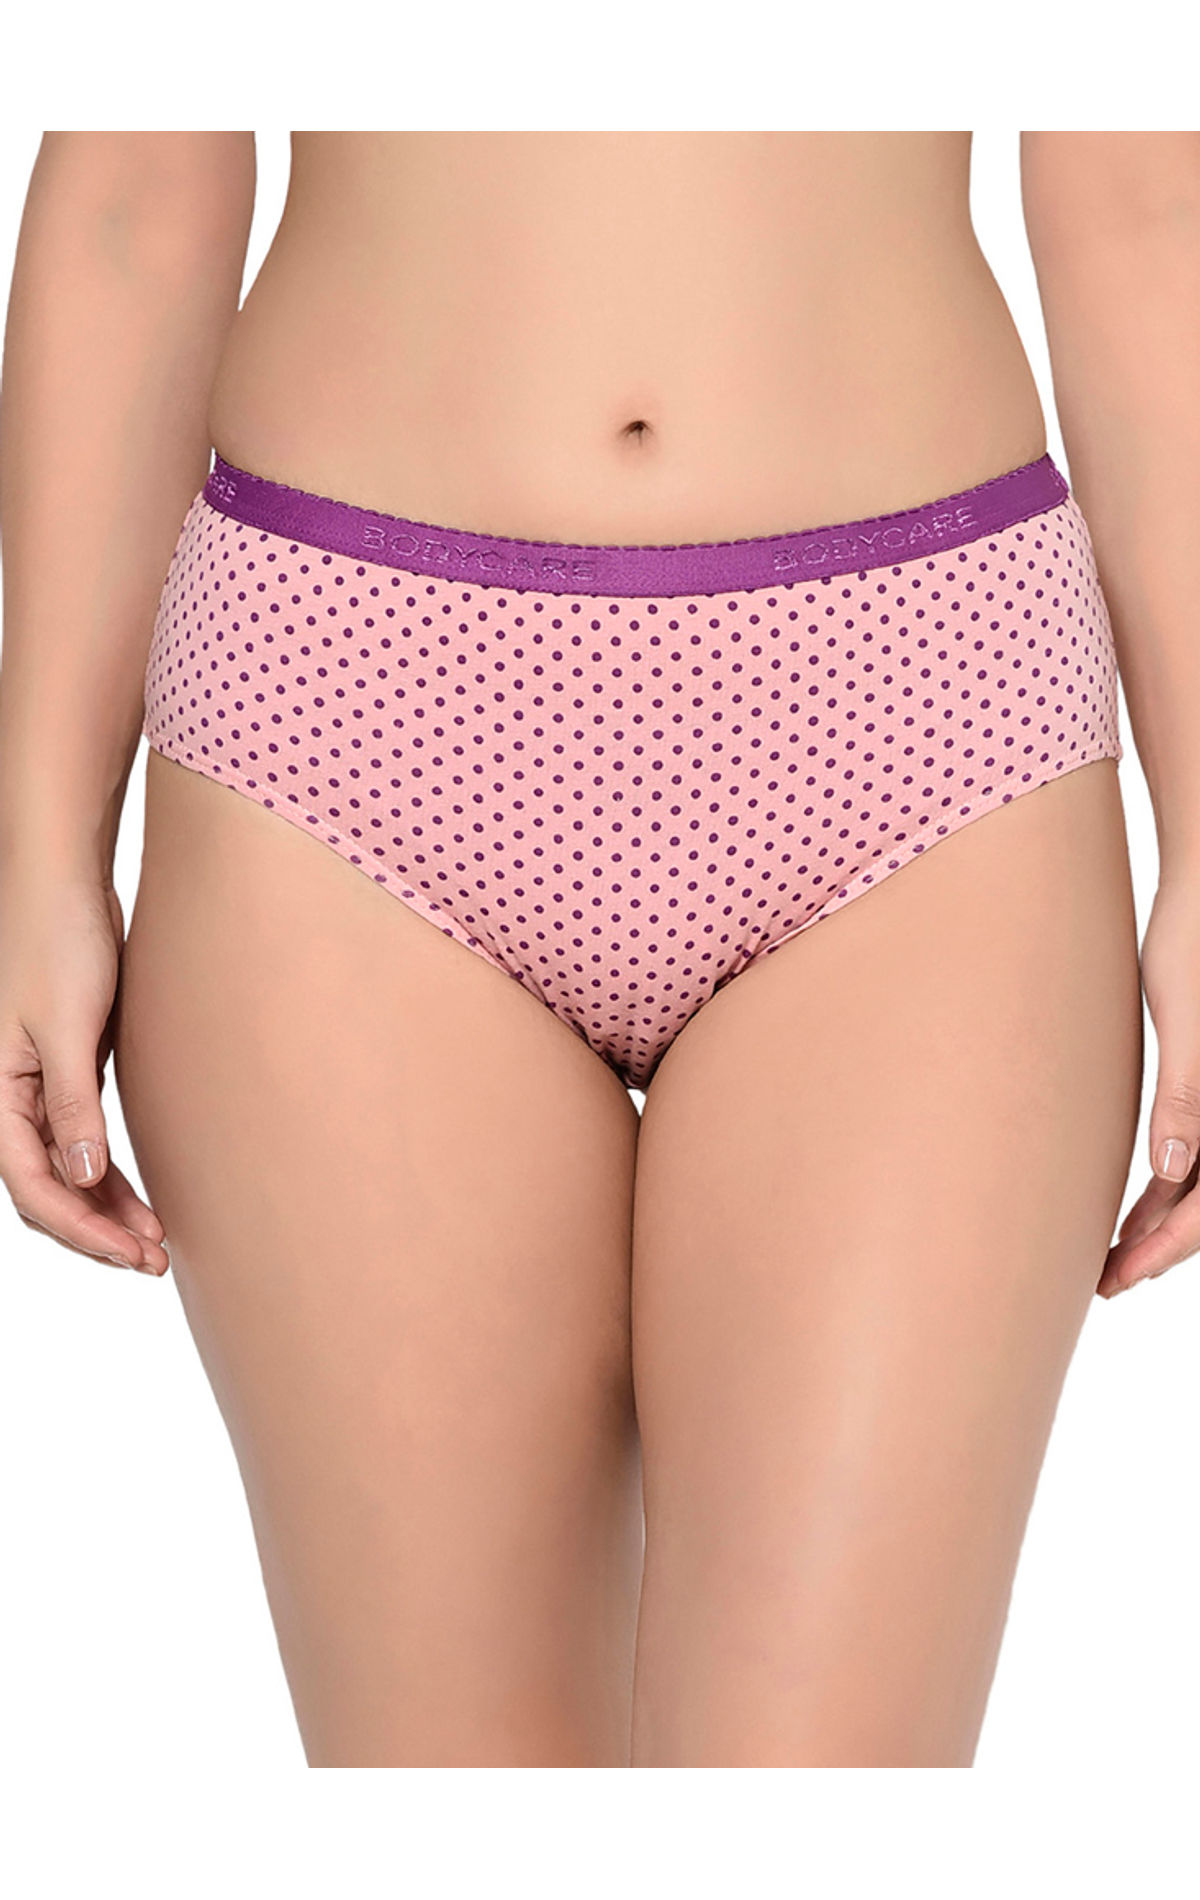 Buy Bodycare Pack of 2 Shaping Panty In Hipster Style Cotton Brief - Nude  Online